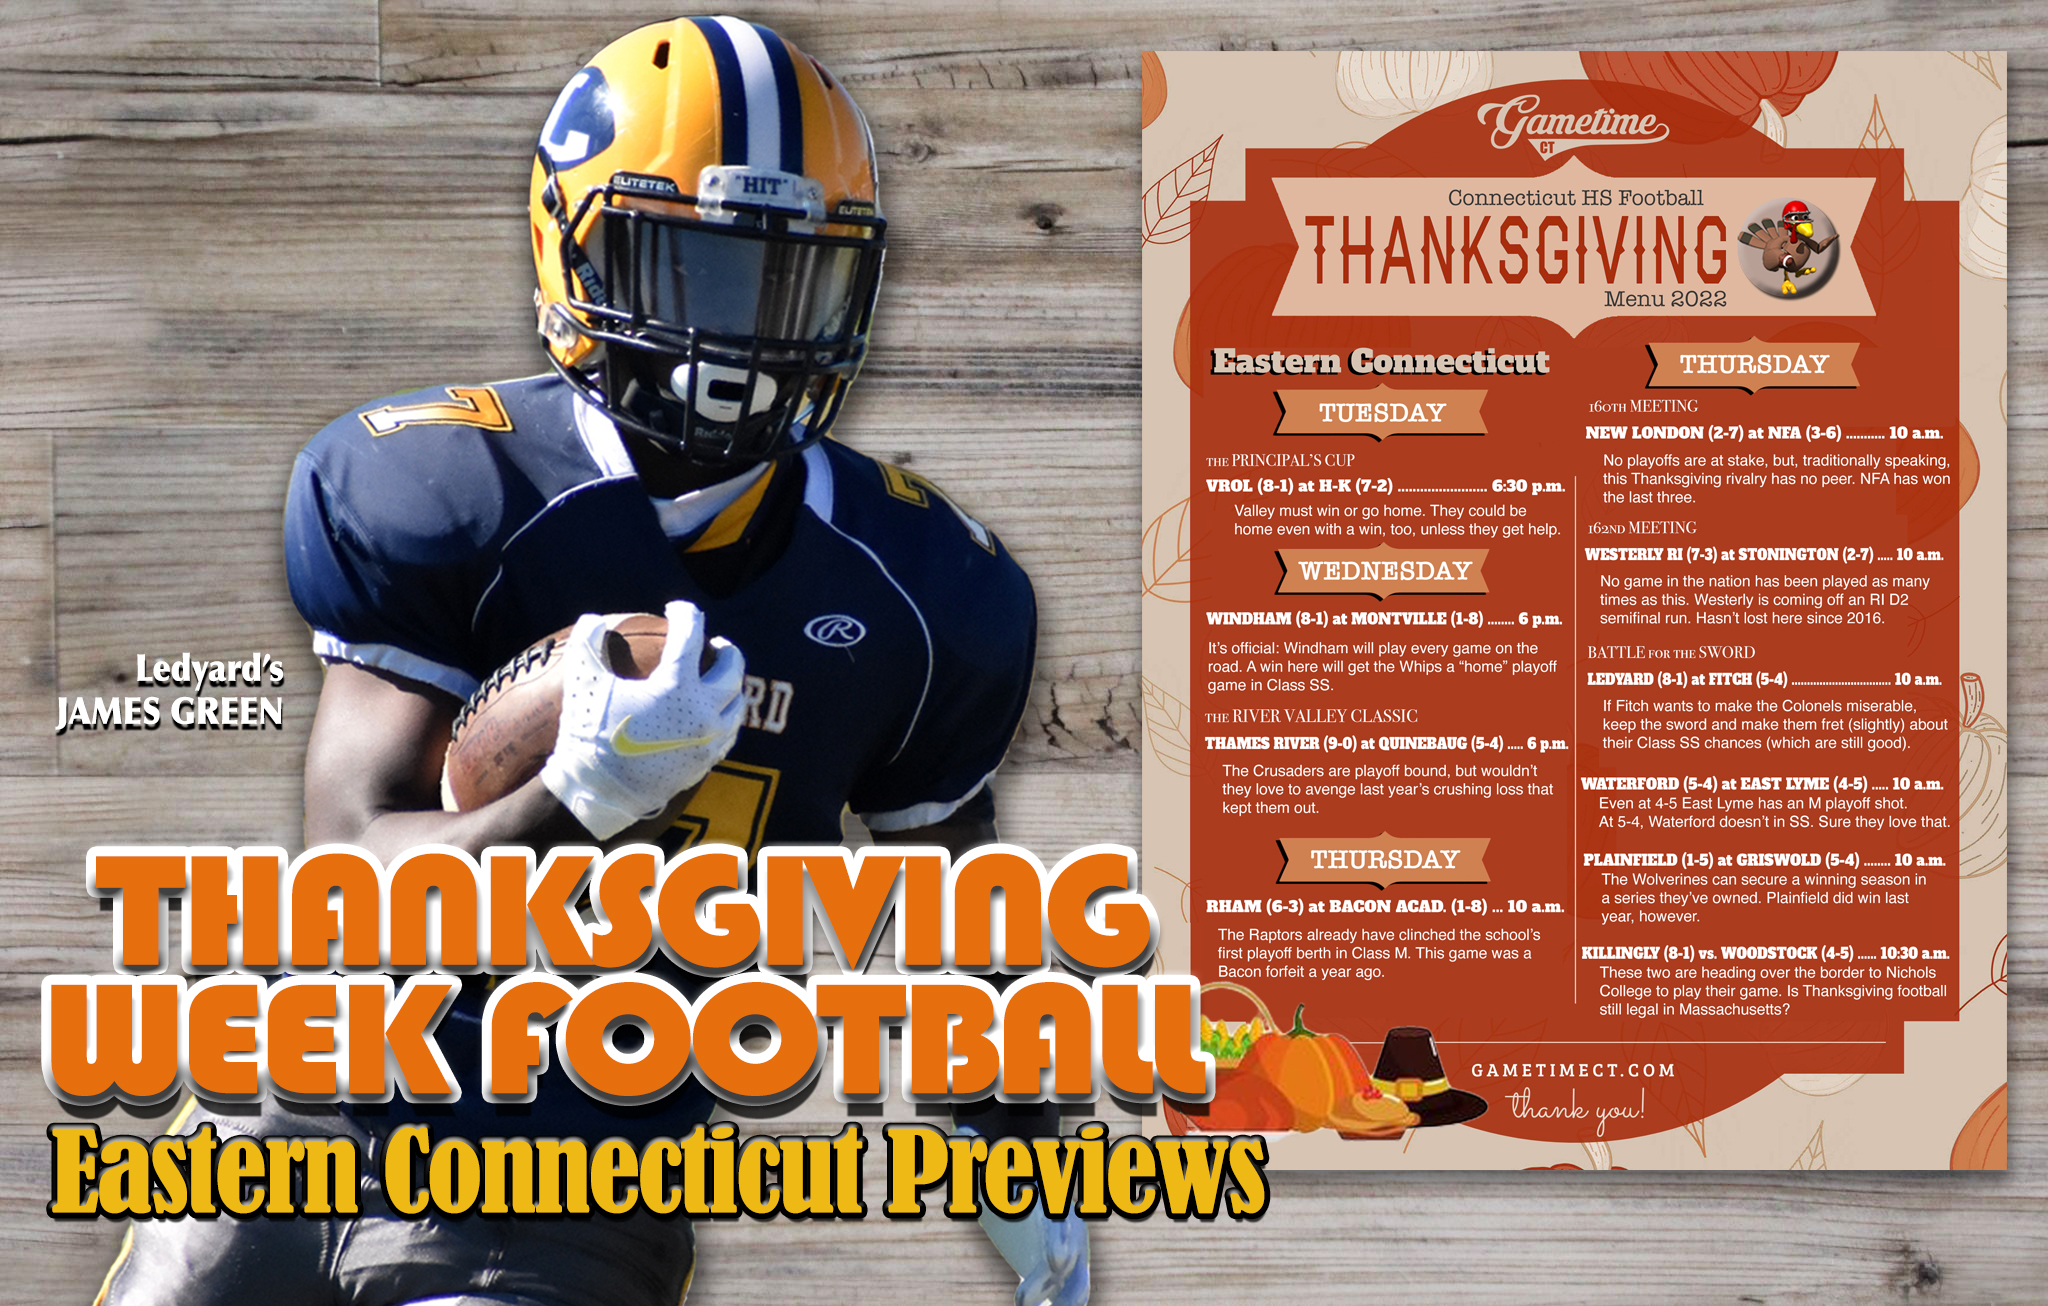 Football capsules for Thanksgiving football games in Eastern